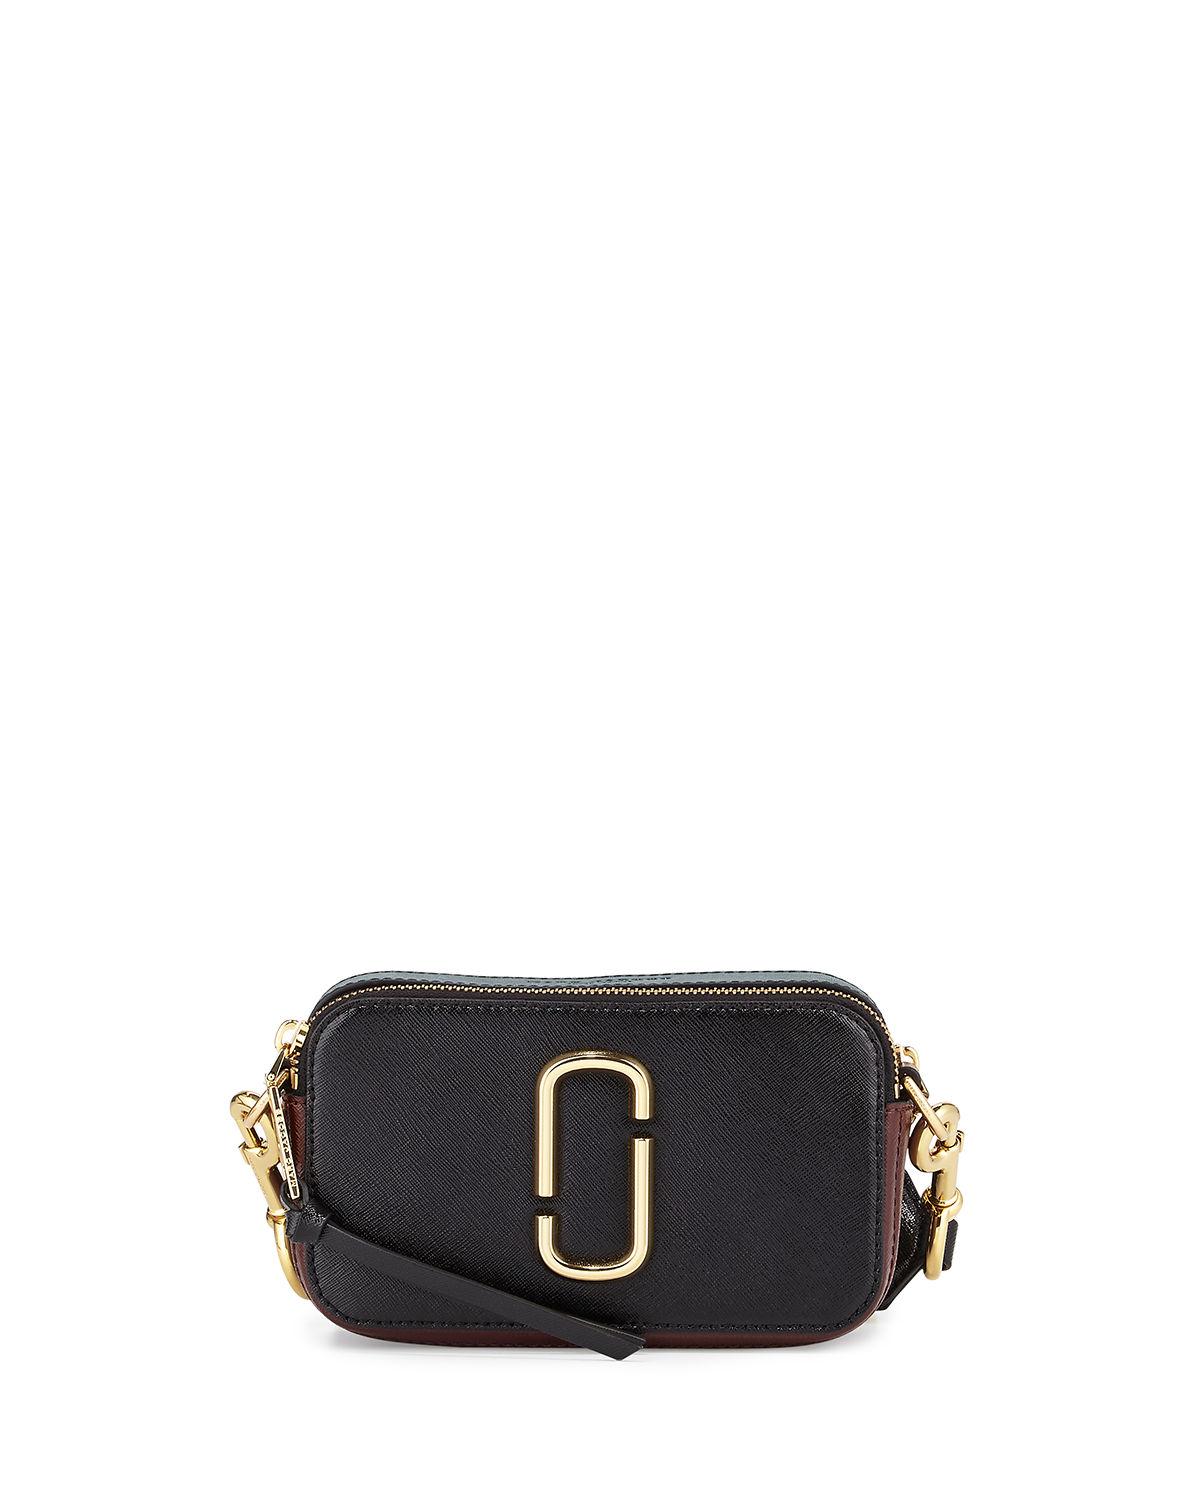 Marc jacobs Snapshot Colorblock Leather Camera Bag in Black | Lyst